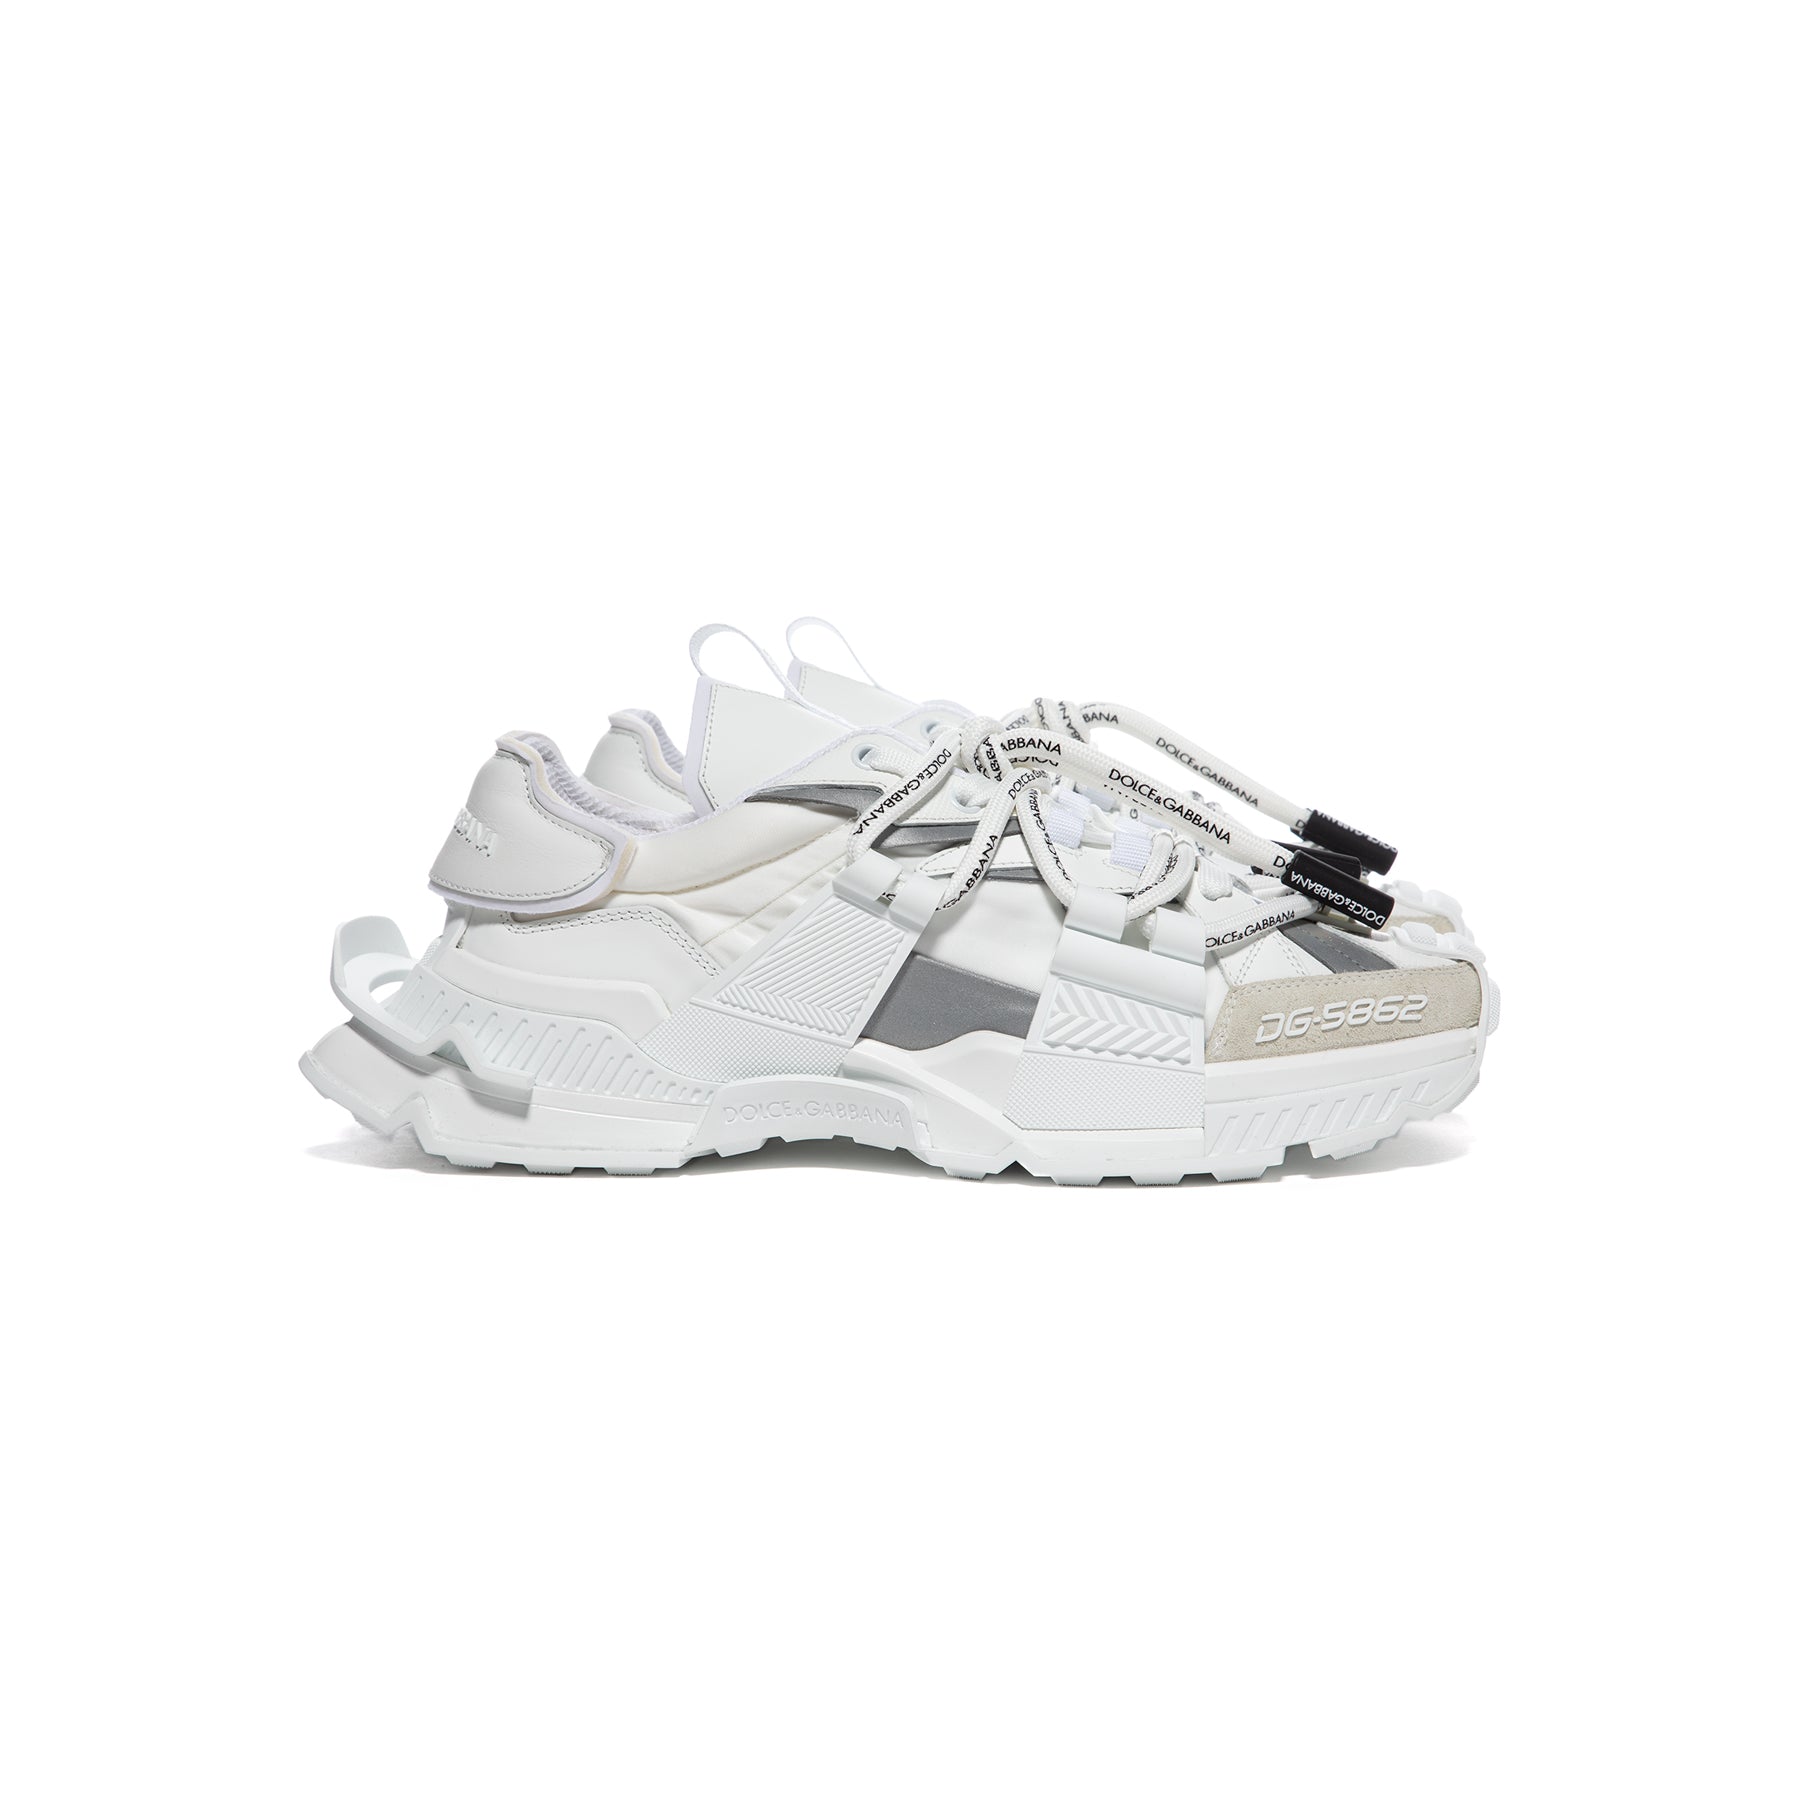 Trouwens Incarijk Gelukkig Dolce & Gabbana Mixed-materials Space Sneakers (White/Silver) – Concepts